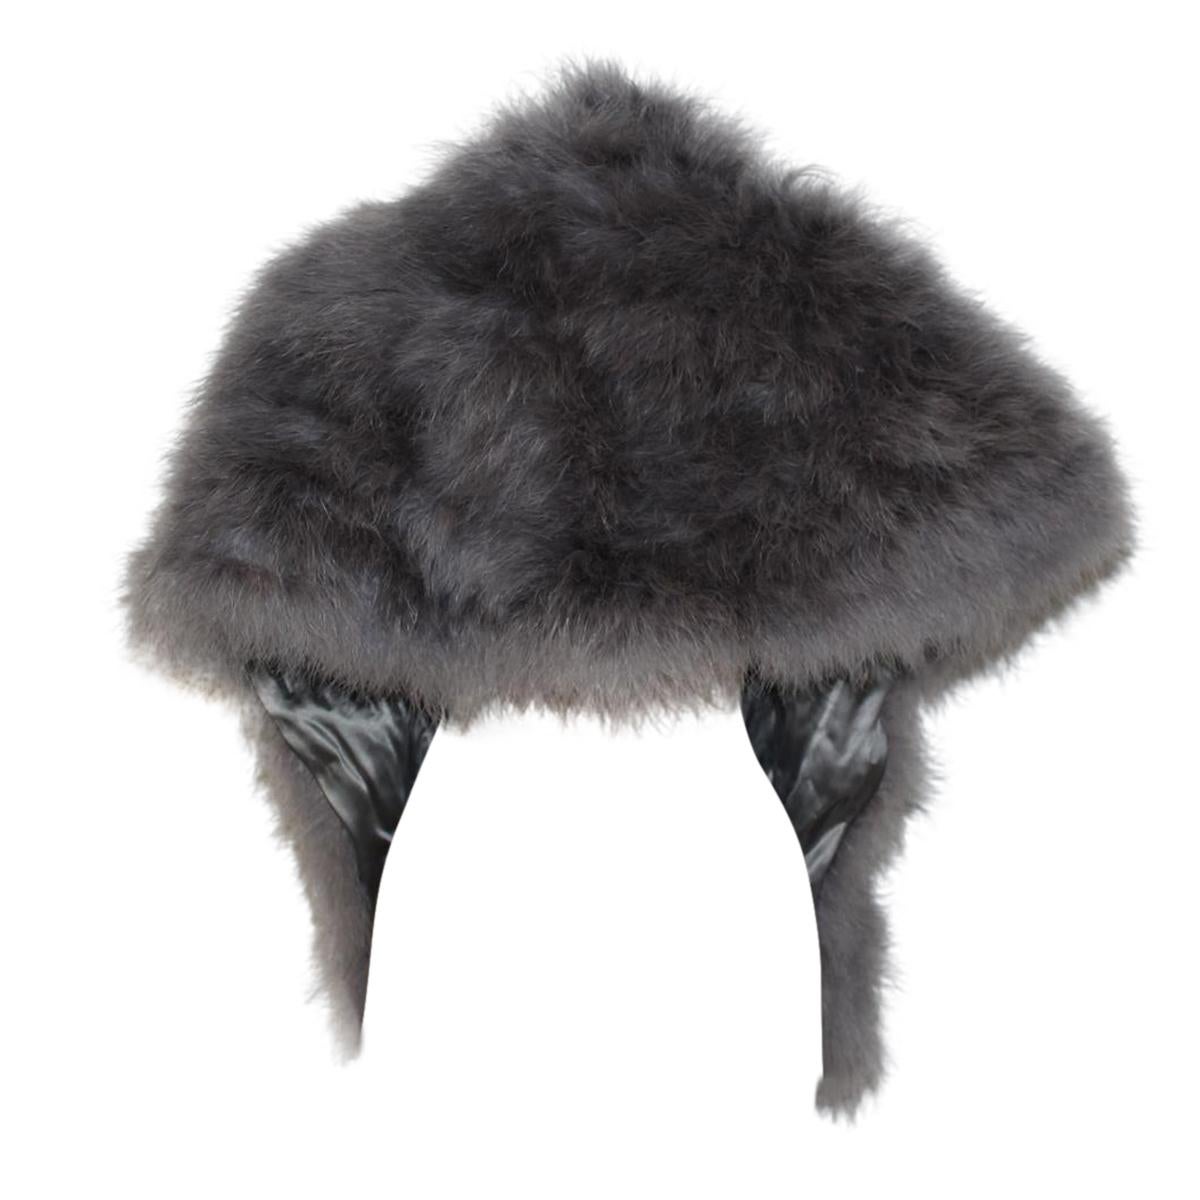 Beautiful and chic Carlo Zini stole
Swan feathers
Grey color
Total length about cm 170 (66.92 inches)
Maximum height cm 38 (14.96 inches)
Worldwide express shipping included in the price !